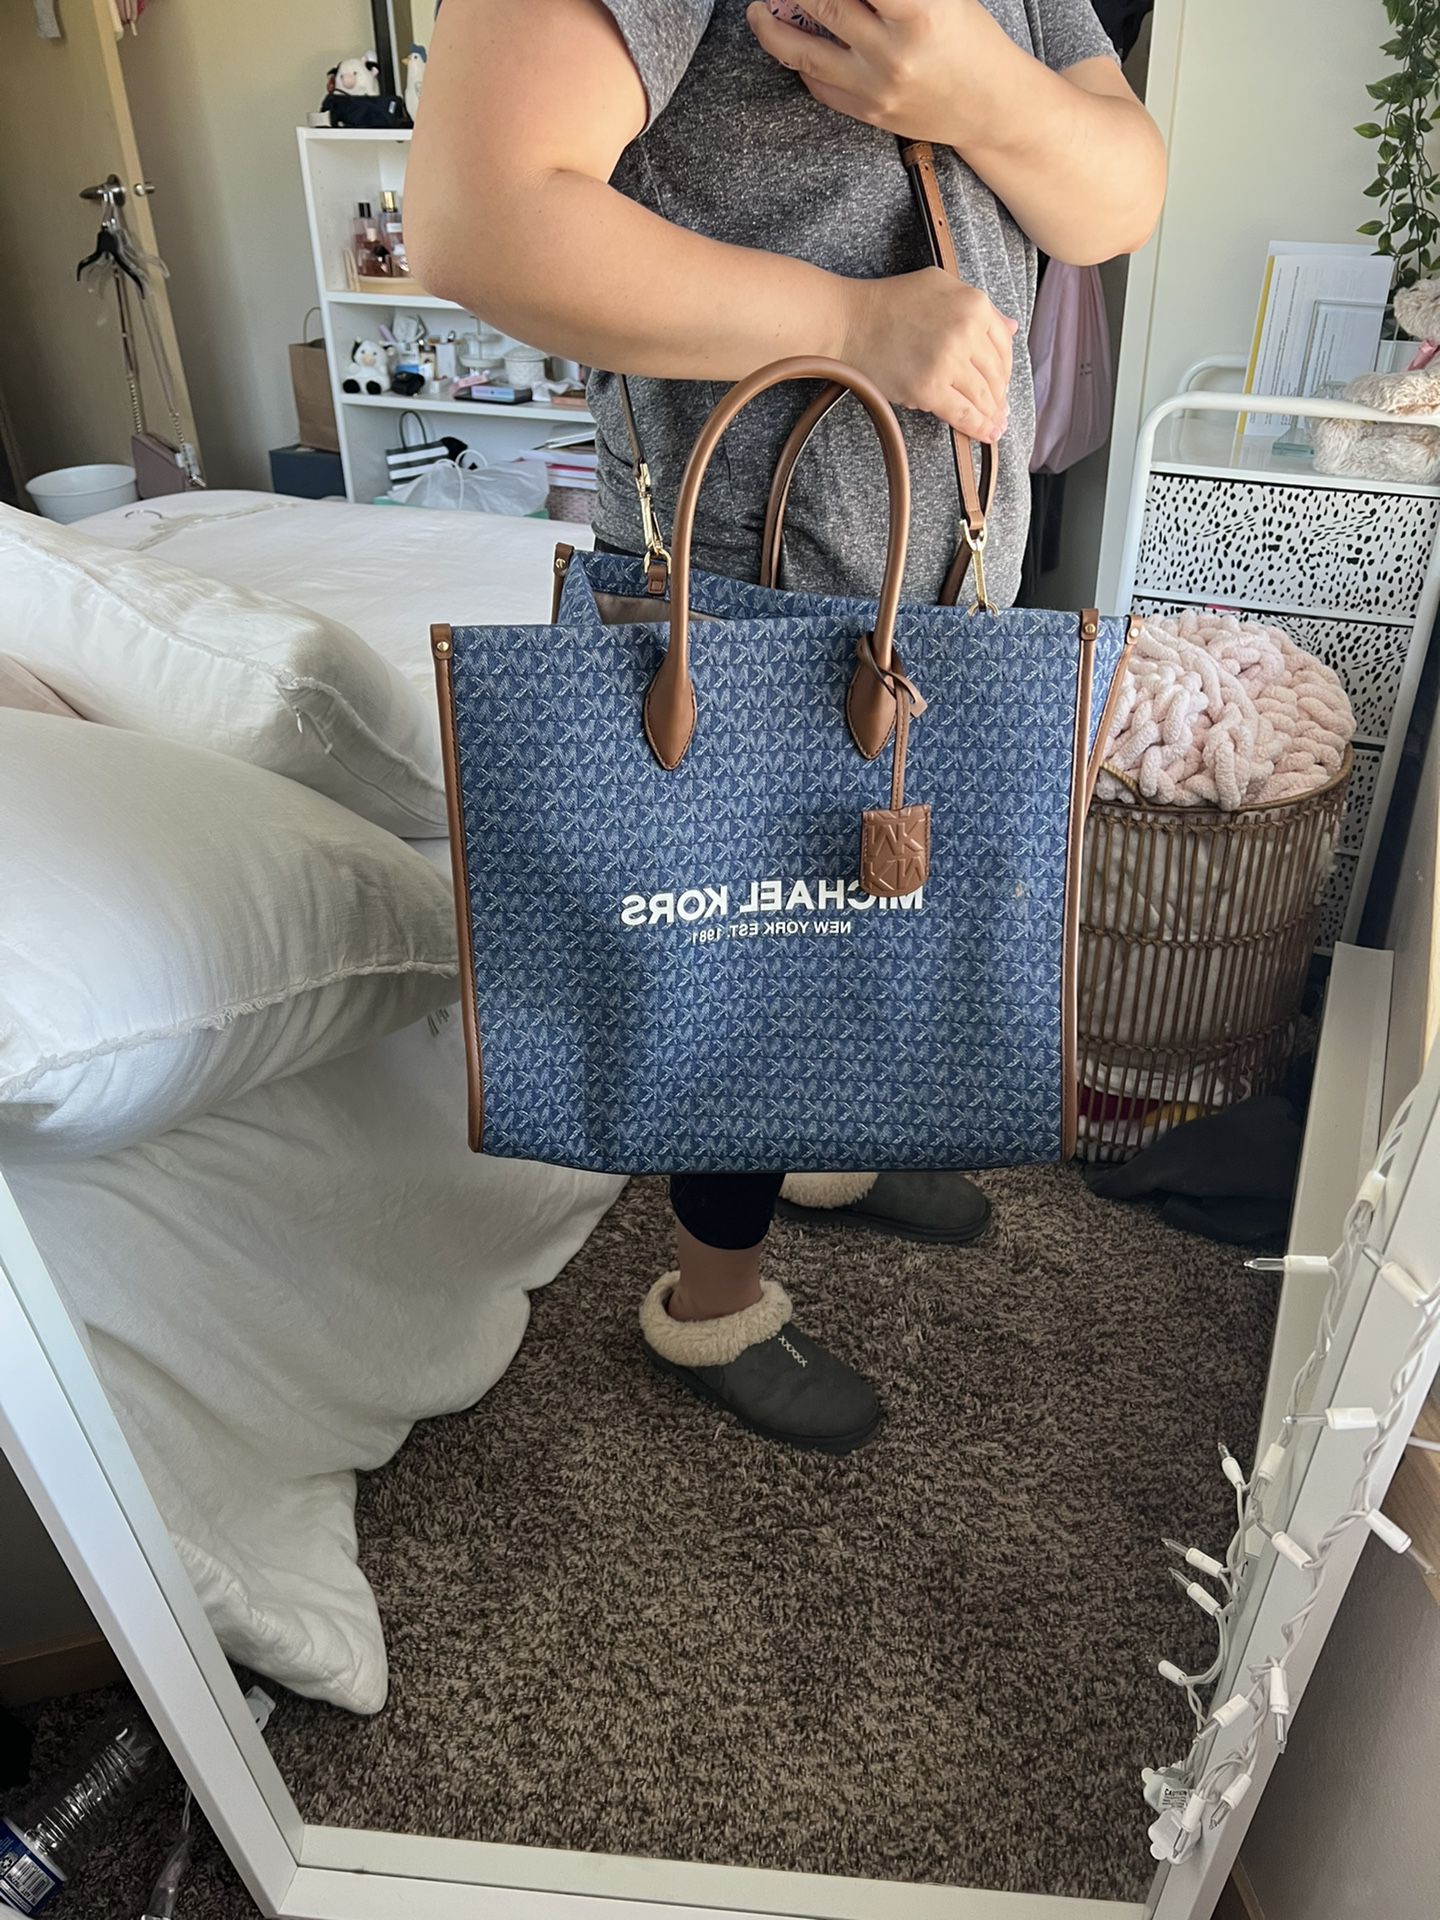 Michael Kors Bag for Sale in Kent, WA - OfferUp